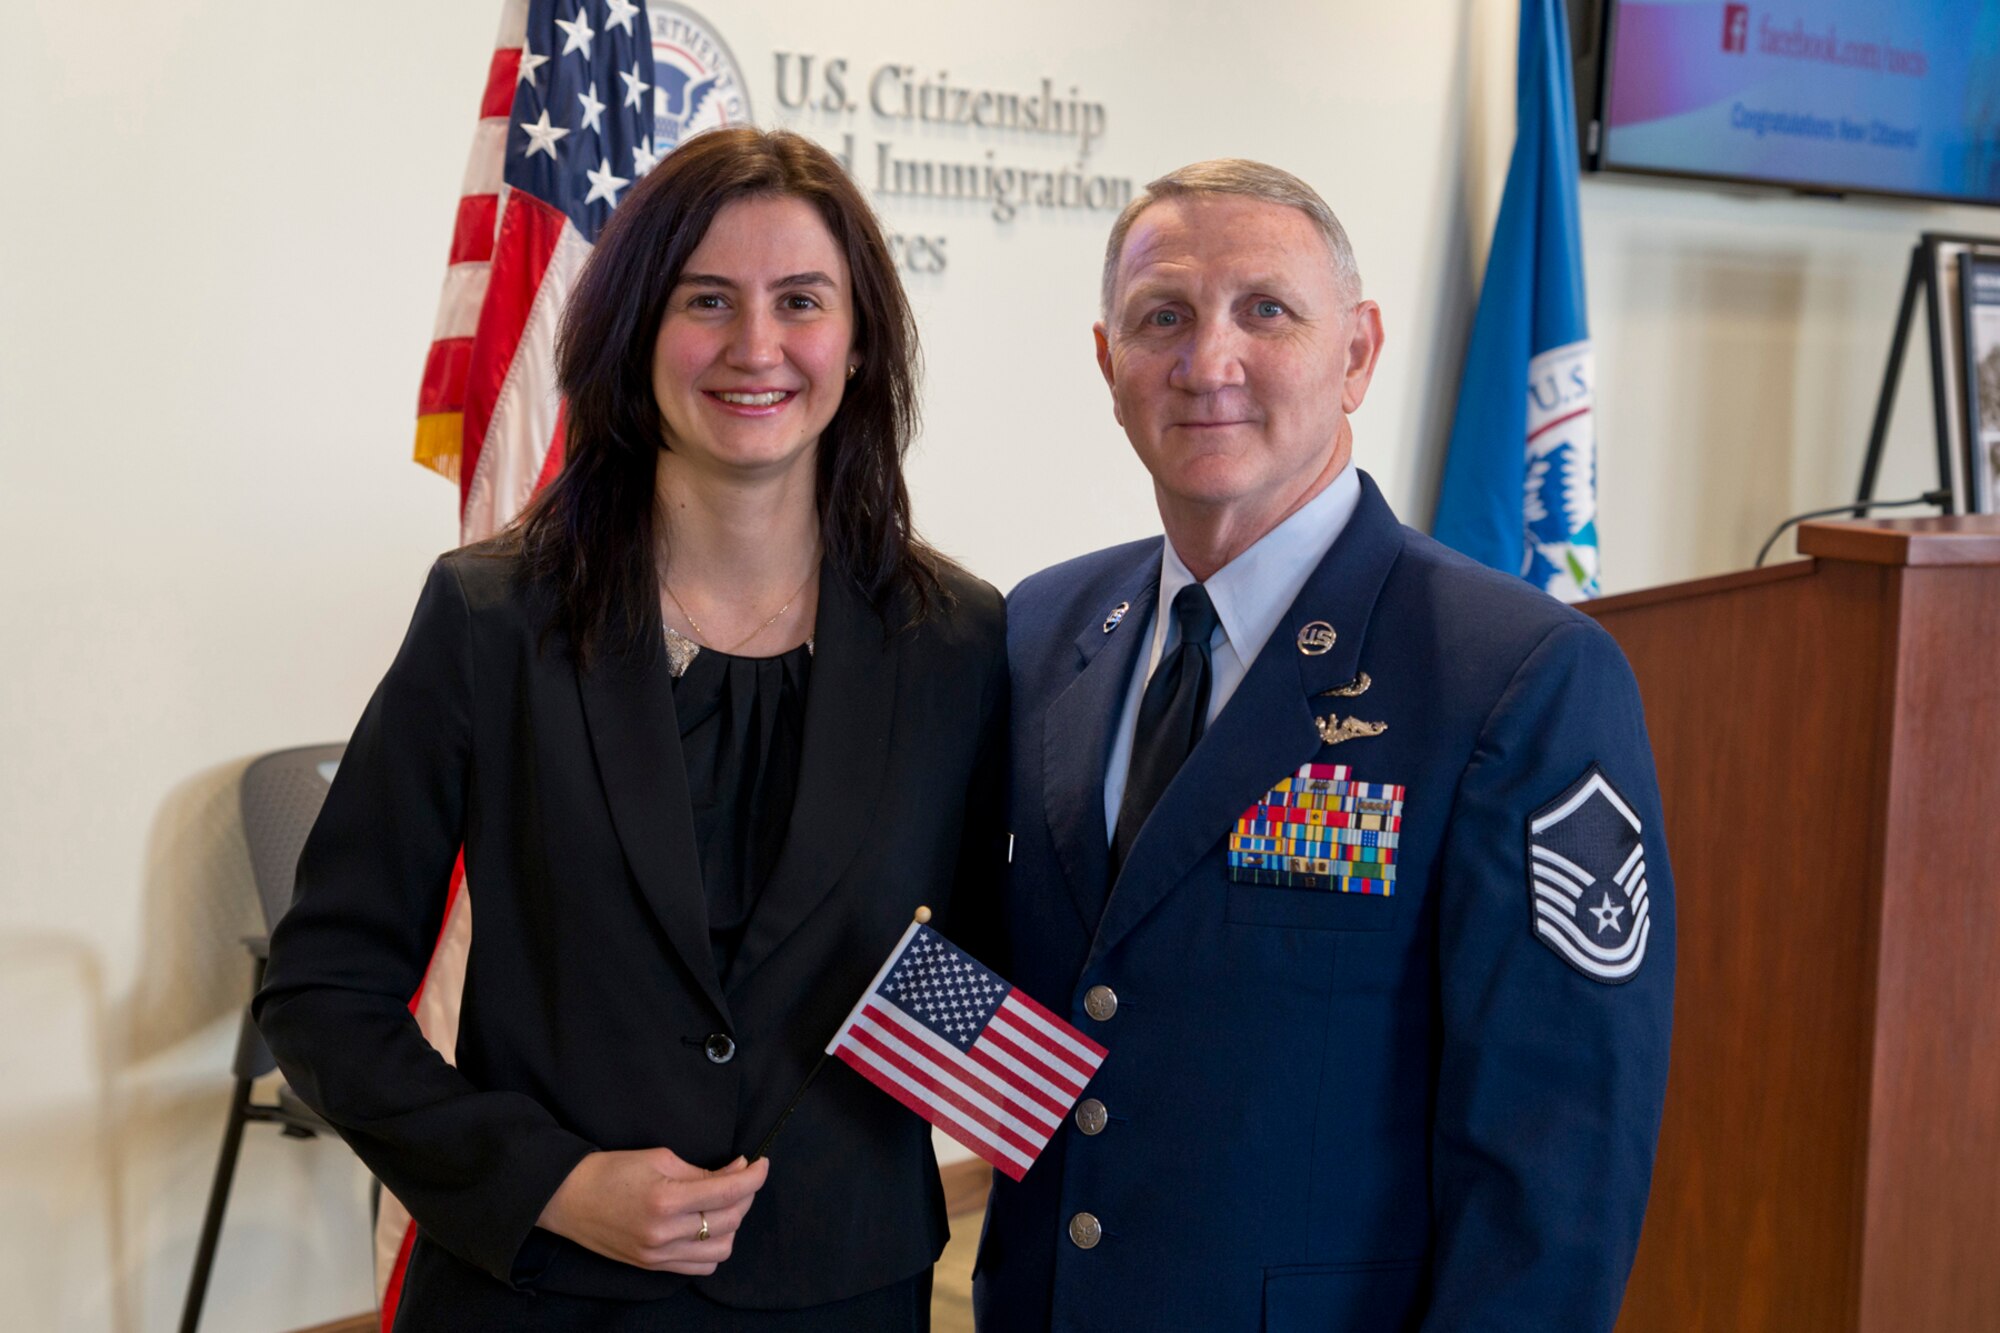 U.S. Air Force Reserve Master Sgt. Jeff and Eva Walston pose for a photo after her Naturalization Ceremony Dec. 16, 2016, in Memphis, Tenn. The couple, who met by accident on the internet, traveled to 19 states, including two trips to the Nation’s Capital in preparation for Eva’s future Citizenship test. (Courtesy photo)